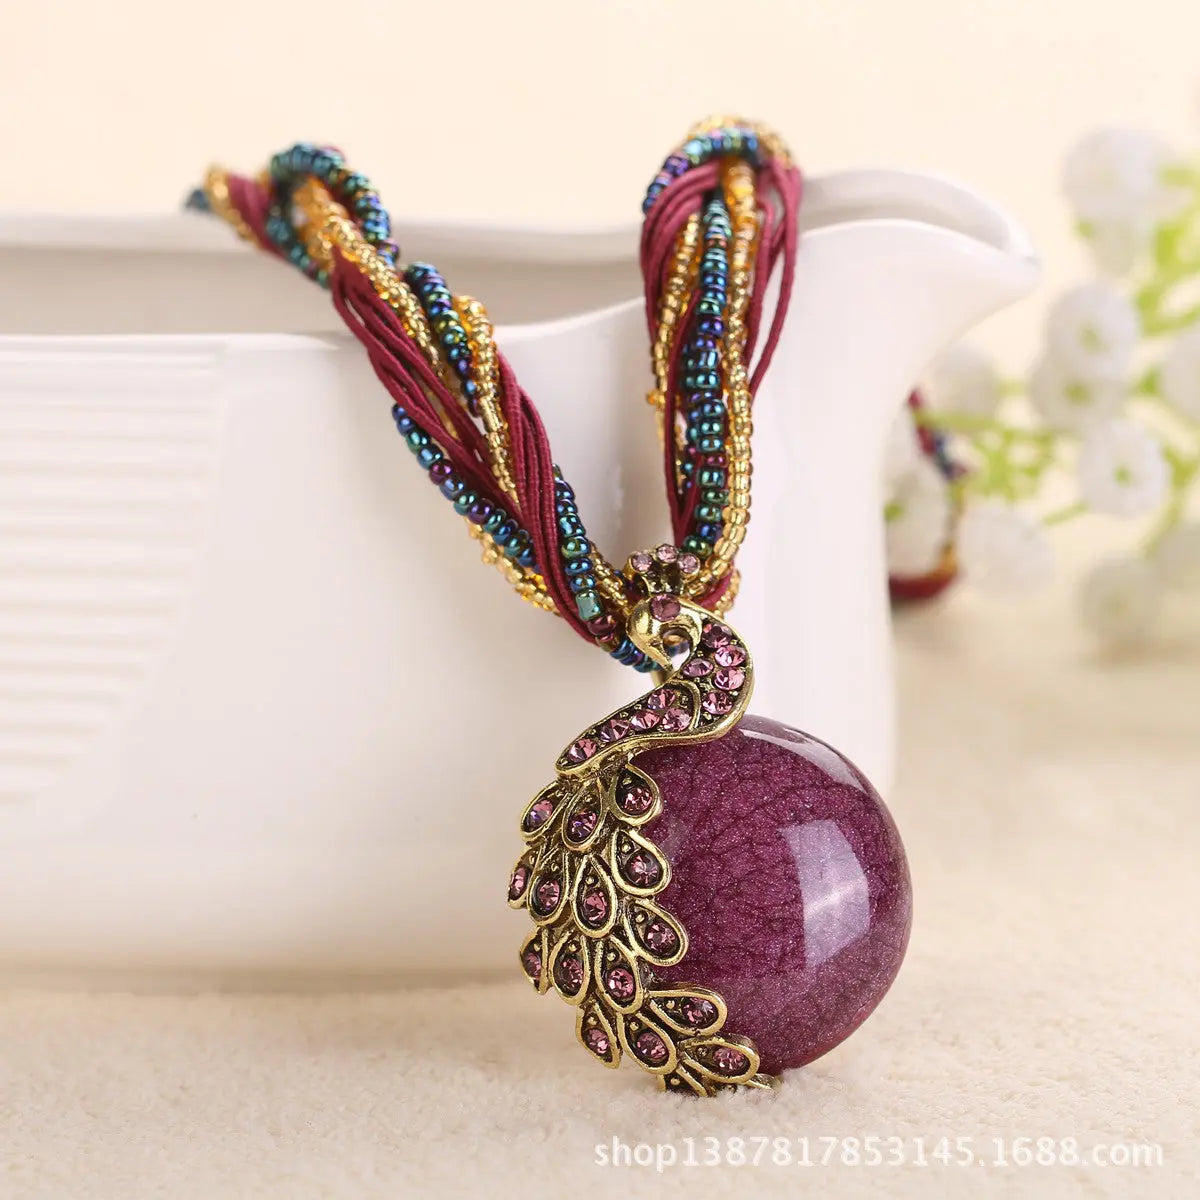 Boho Ethnic Jewelry Choker Handmade Pendant Necklace Natural Stone Bead Peacock Statement Maxi Necklace for Women Girls Gifts - Trending's Arena Beauty Boho Ethnic Jewelry Choker Handmade Pendant Necklace Natural Stone Bead Peacock Statement Maxi Necklace for Women Girls Gifts Electronics Facial & Neck dark-purple